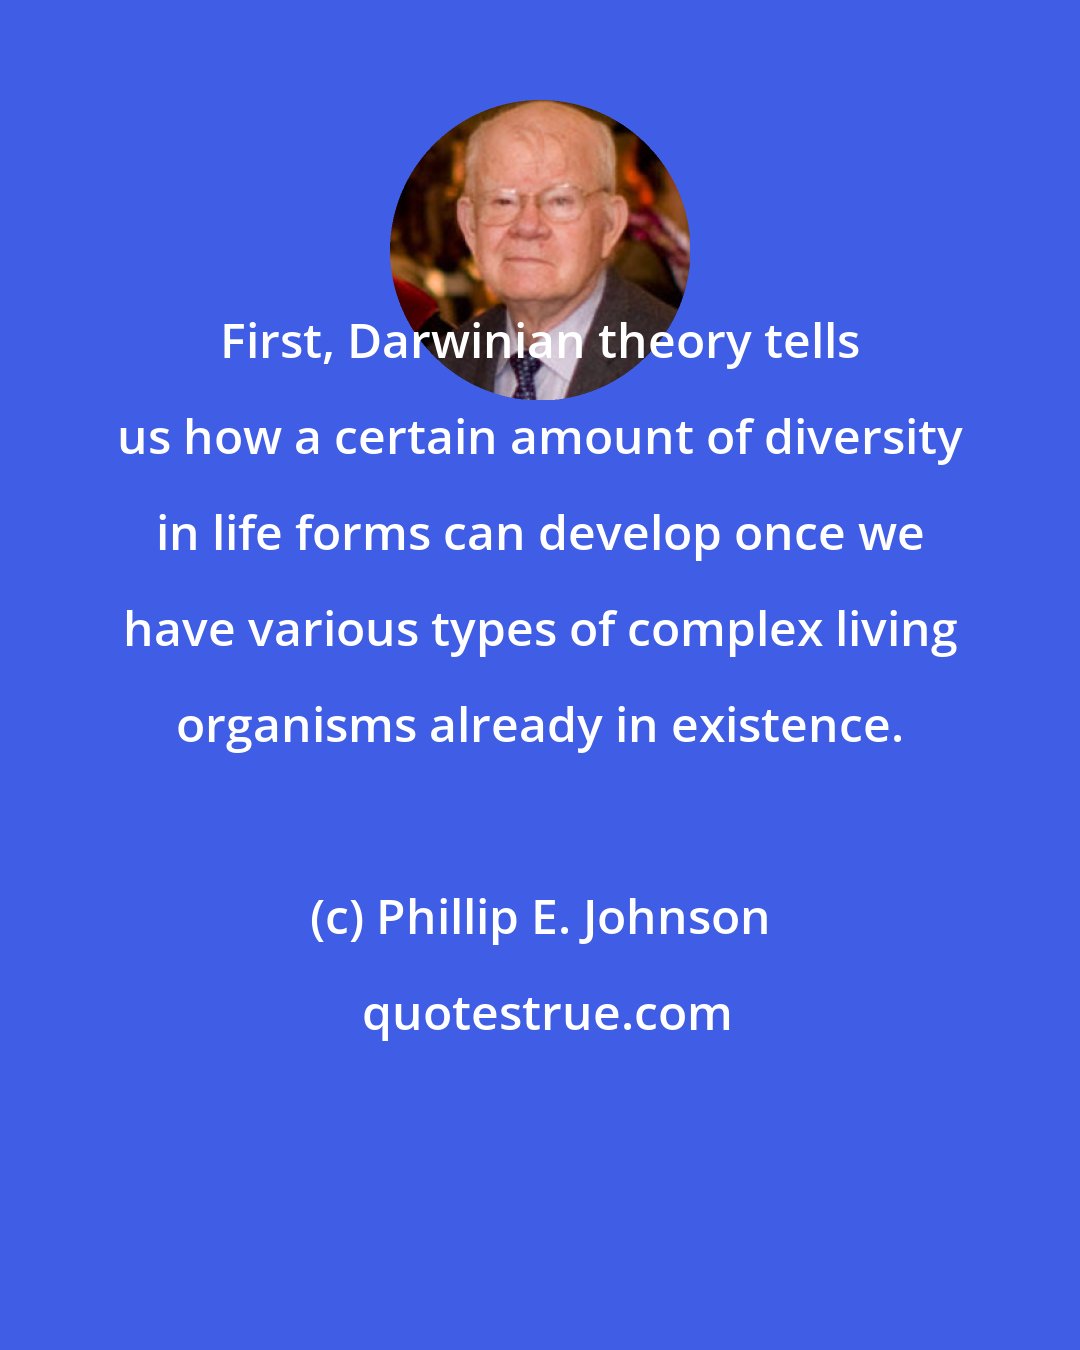 Phillip E. Johnson: First, Darwinian theory tells us how a certain amount of diversity in life forms can develop once we have various types of complex living organisms already in existence.